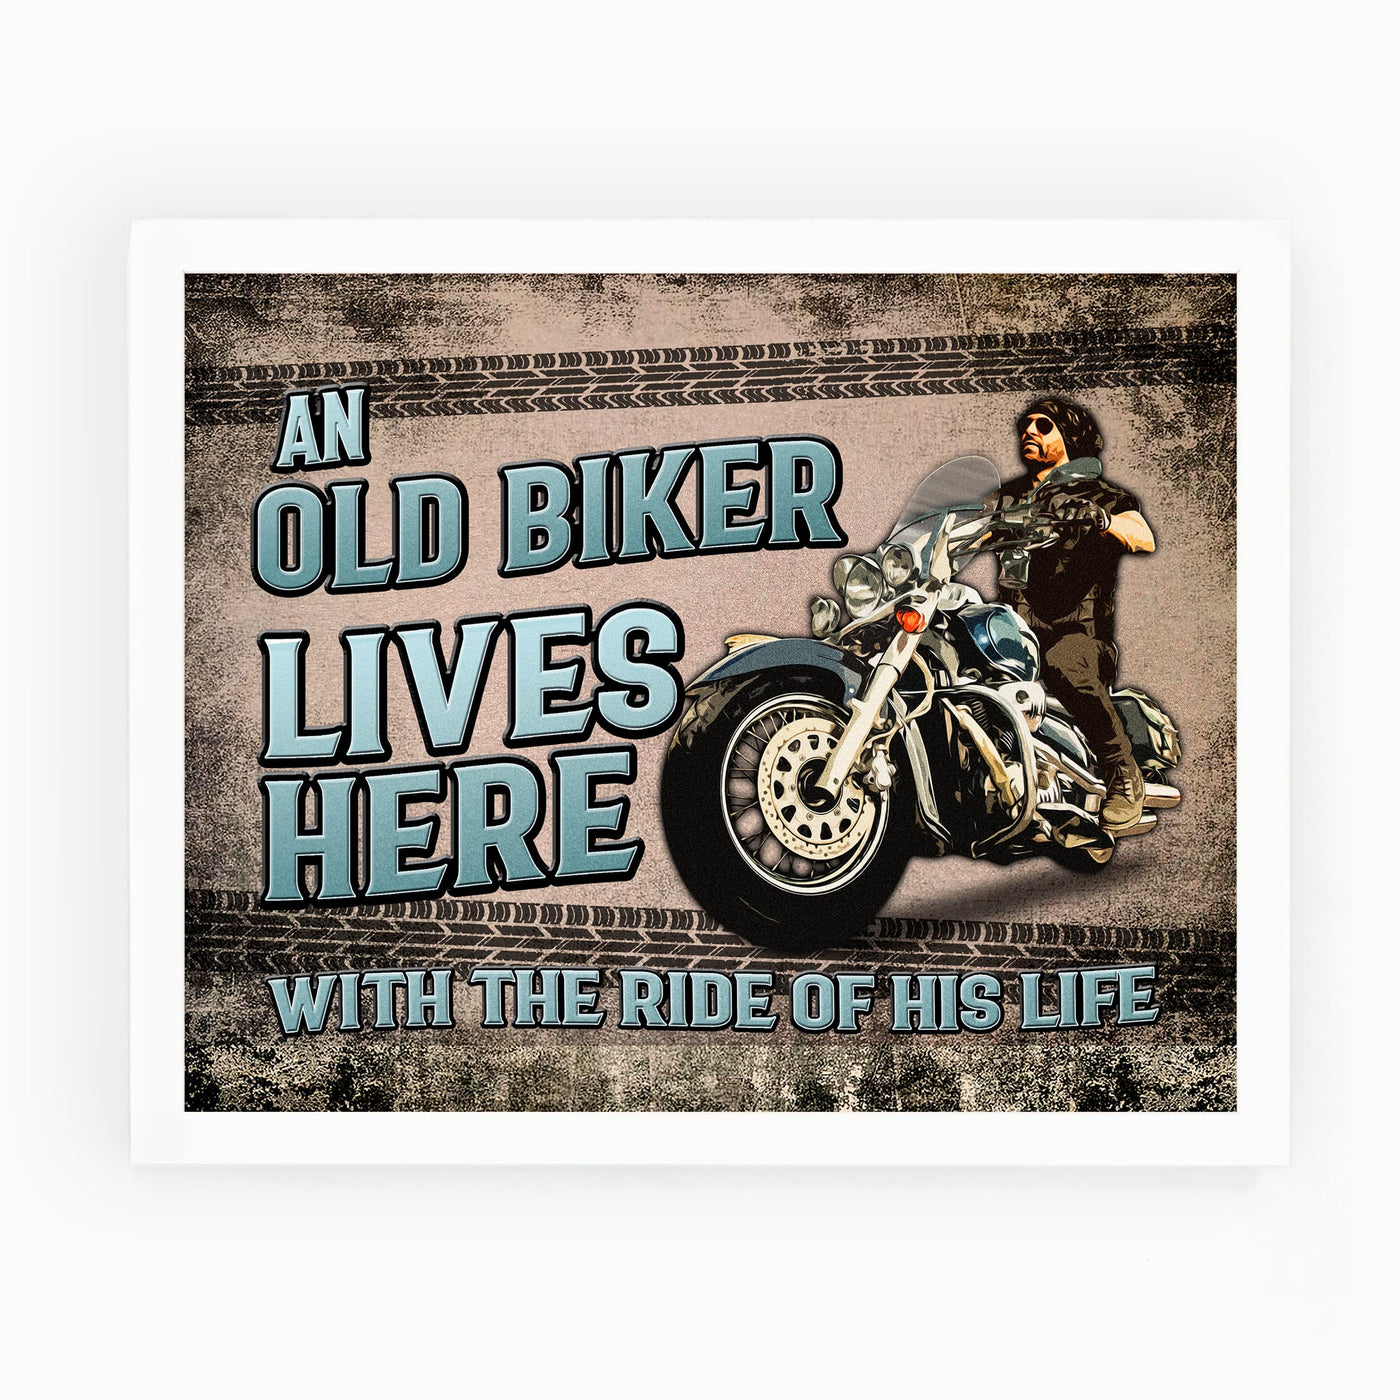 Old Biker Lives Here With Ride of His Life-Funny Sign Wall Decor -10x8" Rustic Garage Wall Art Print-Ready To Frame. Retro Home-Office-Bar-Cave-Shop Decor. Great Gift for Motorcyclists & Gearheads!